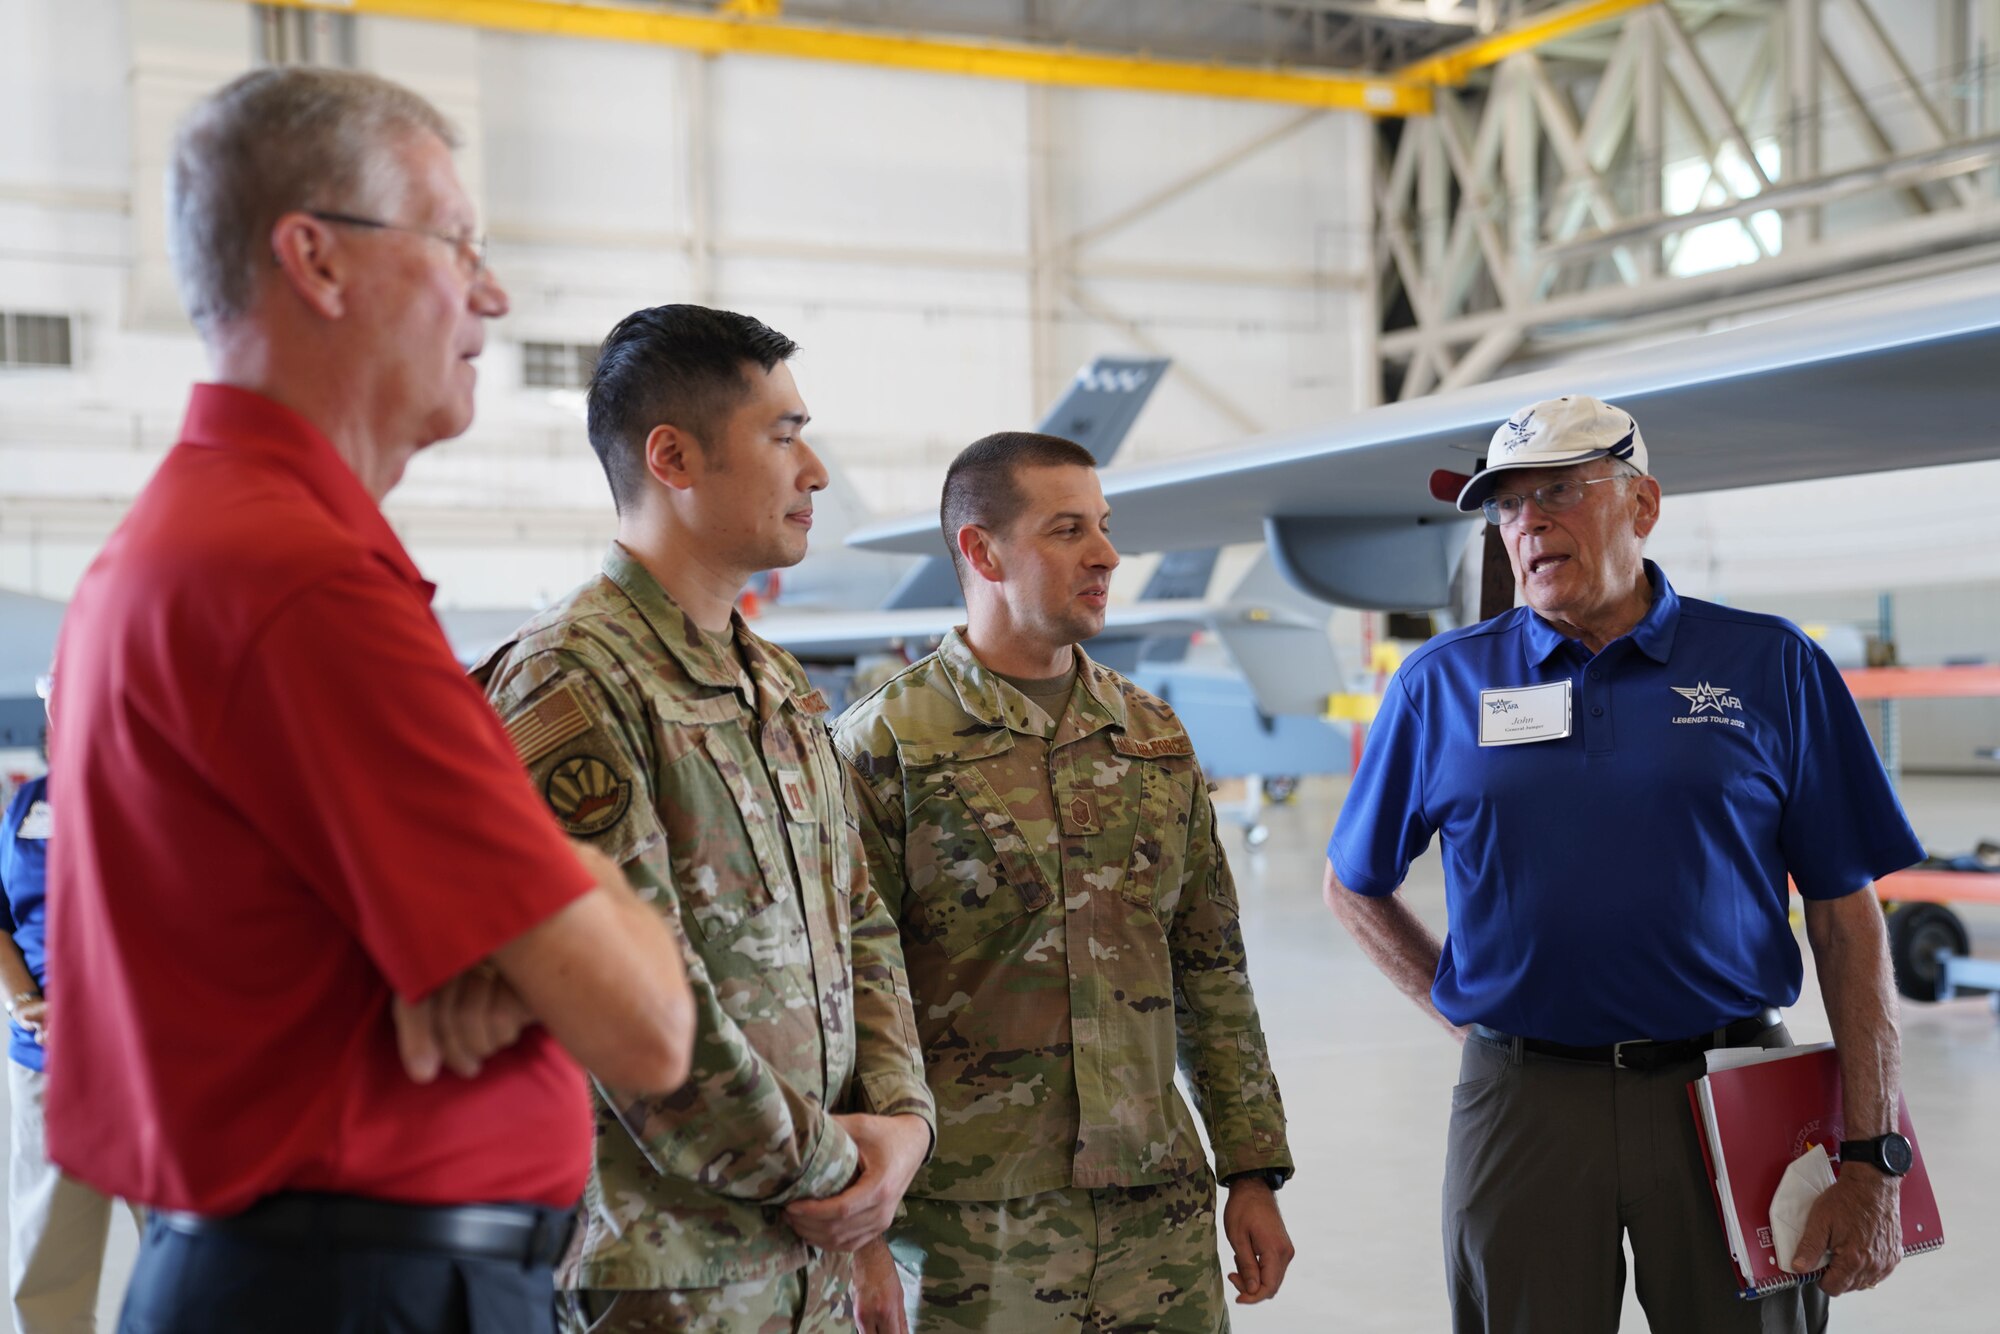 Retired Air Force general speaking with three active duty military members in uniform.